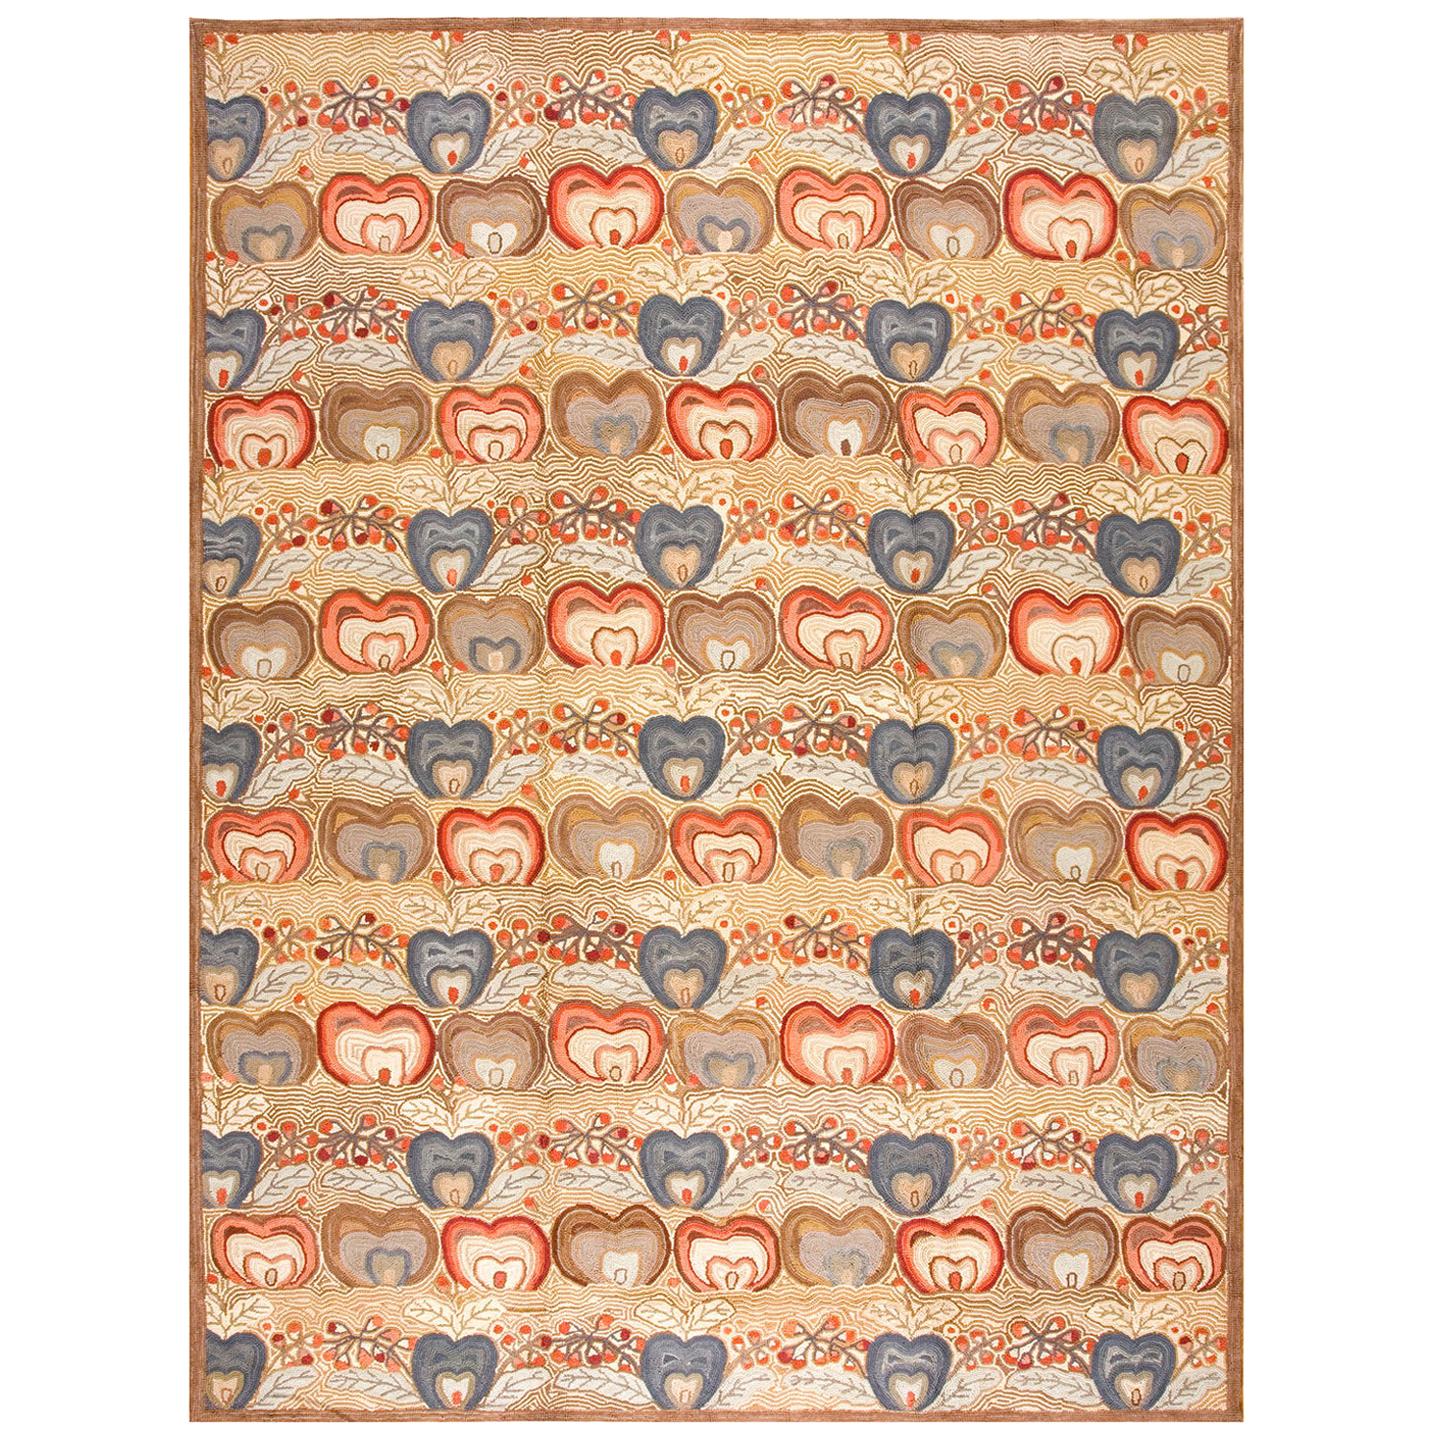 Contemporary American Hooked Rug (6' x 9' - 183x274 ) For Sale